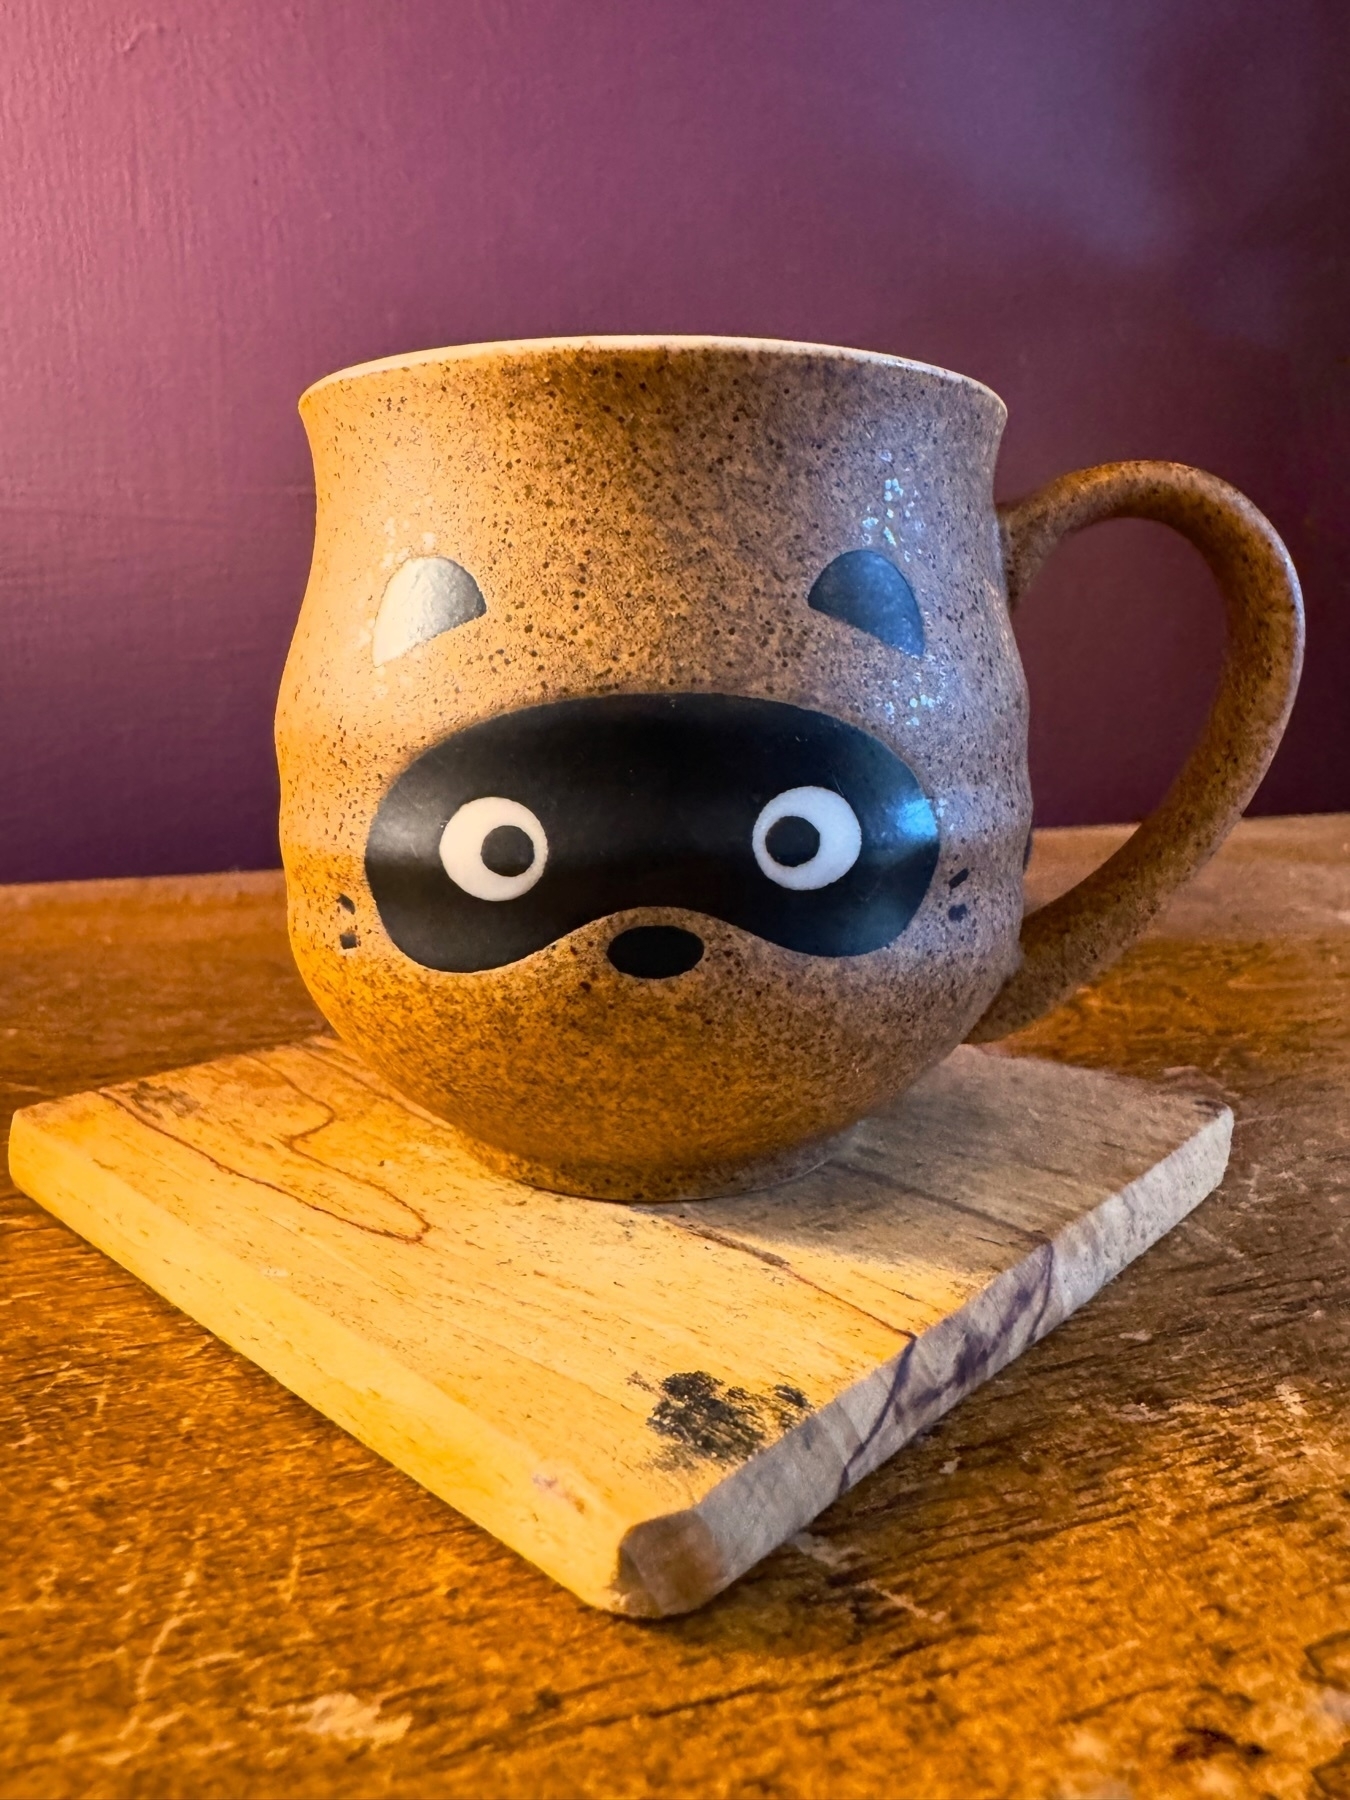 A ceramic mug designed to look like a raccoon face, placed on a wooden coaster on a wooden table with a purple wall background.